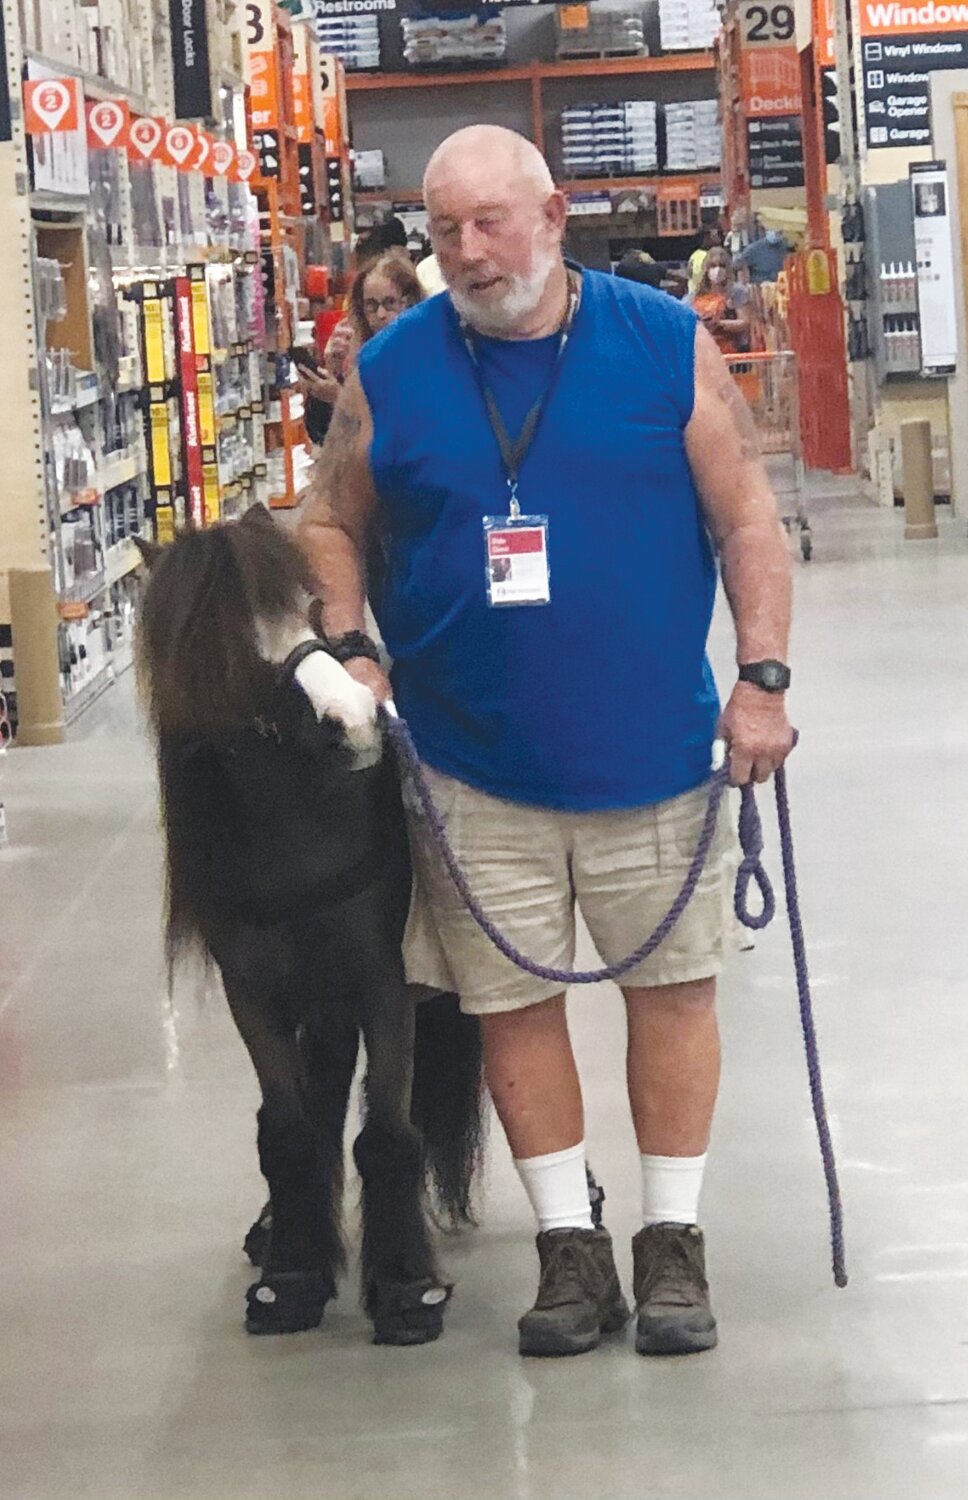 Dale Dunn, a resident and owner of Ravenwood Farms in Keystone Heights, is hosting the Pet Partners World’s Largest Pet Walk on Sept. 23 at the St. Johns County Equestrian Center. Dunn plans to walk his horse while his wife, Dale, is happiest around cats.